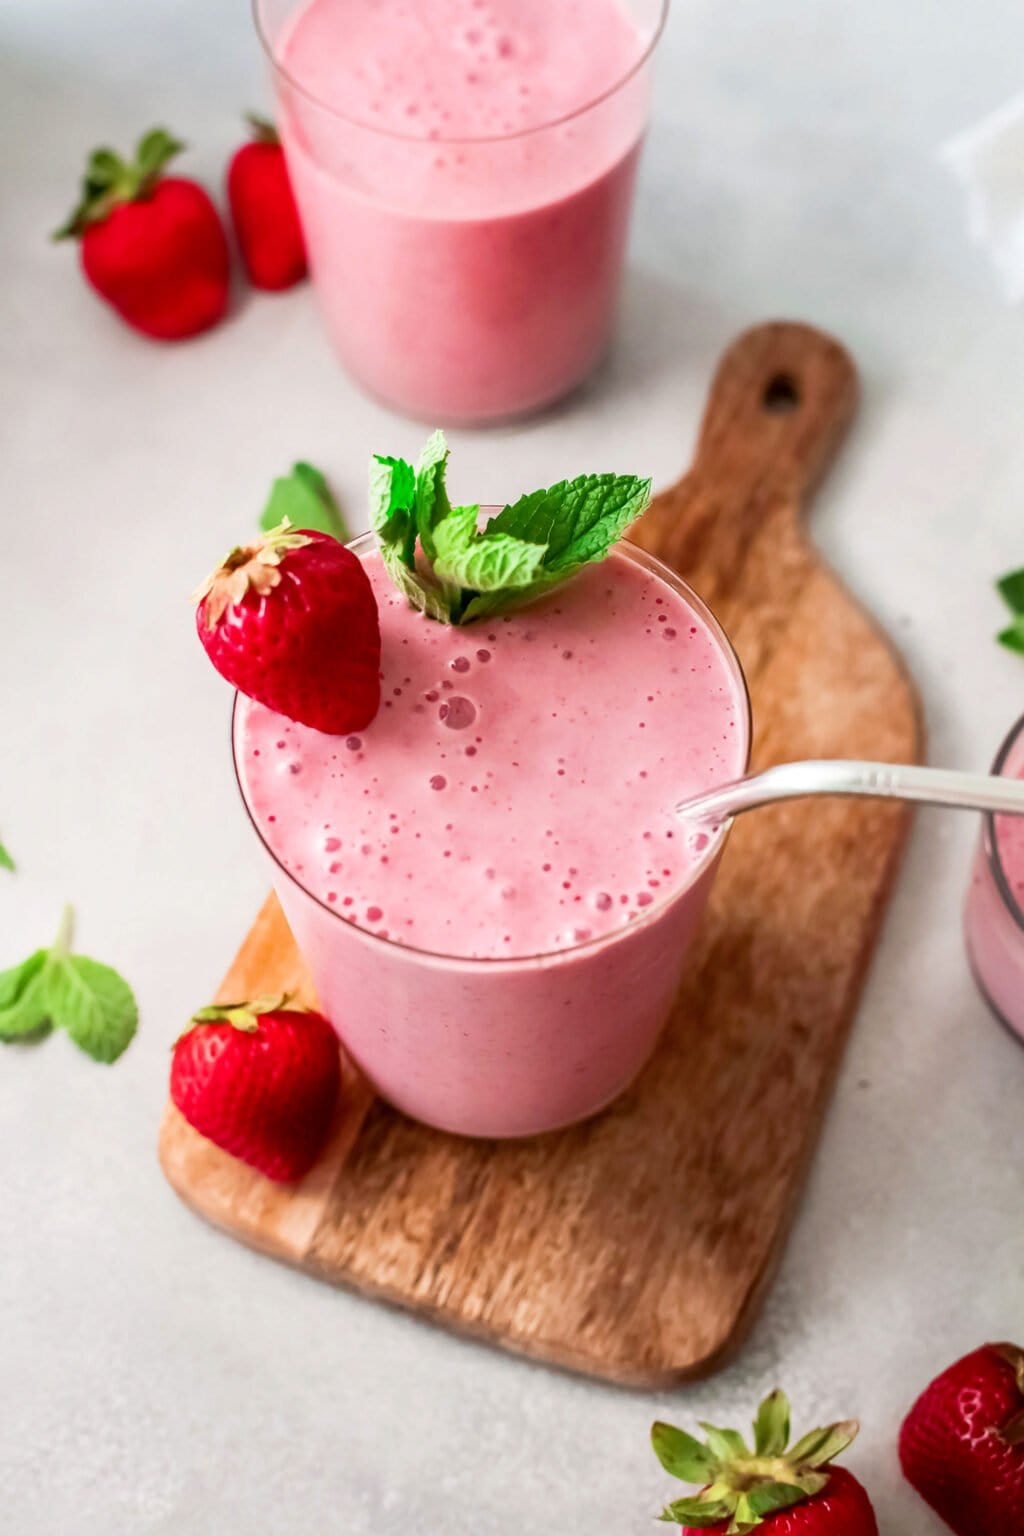 Strawberry Banana Smoothie (Frozen Fruit Smoothie) - Fit Foodie Finds